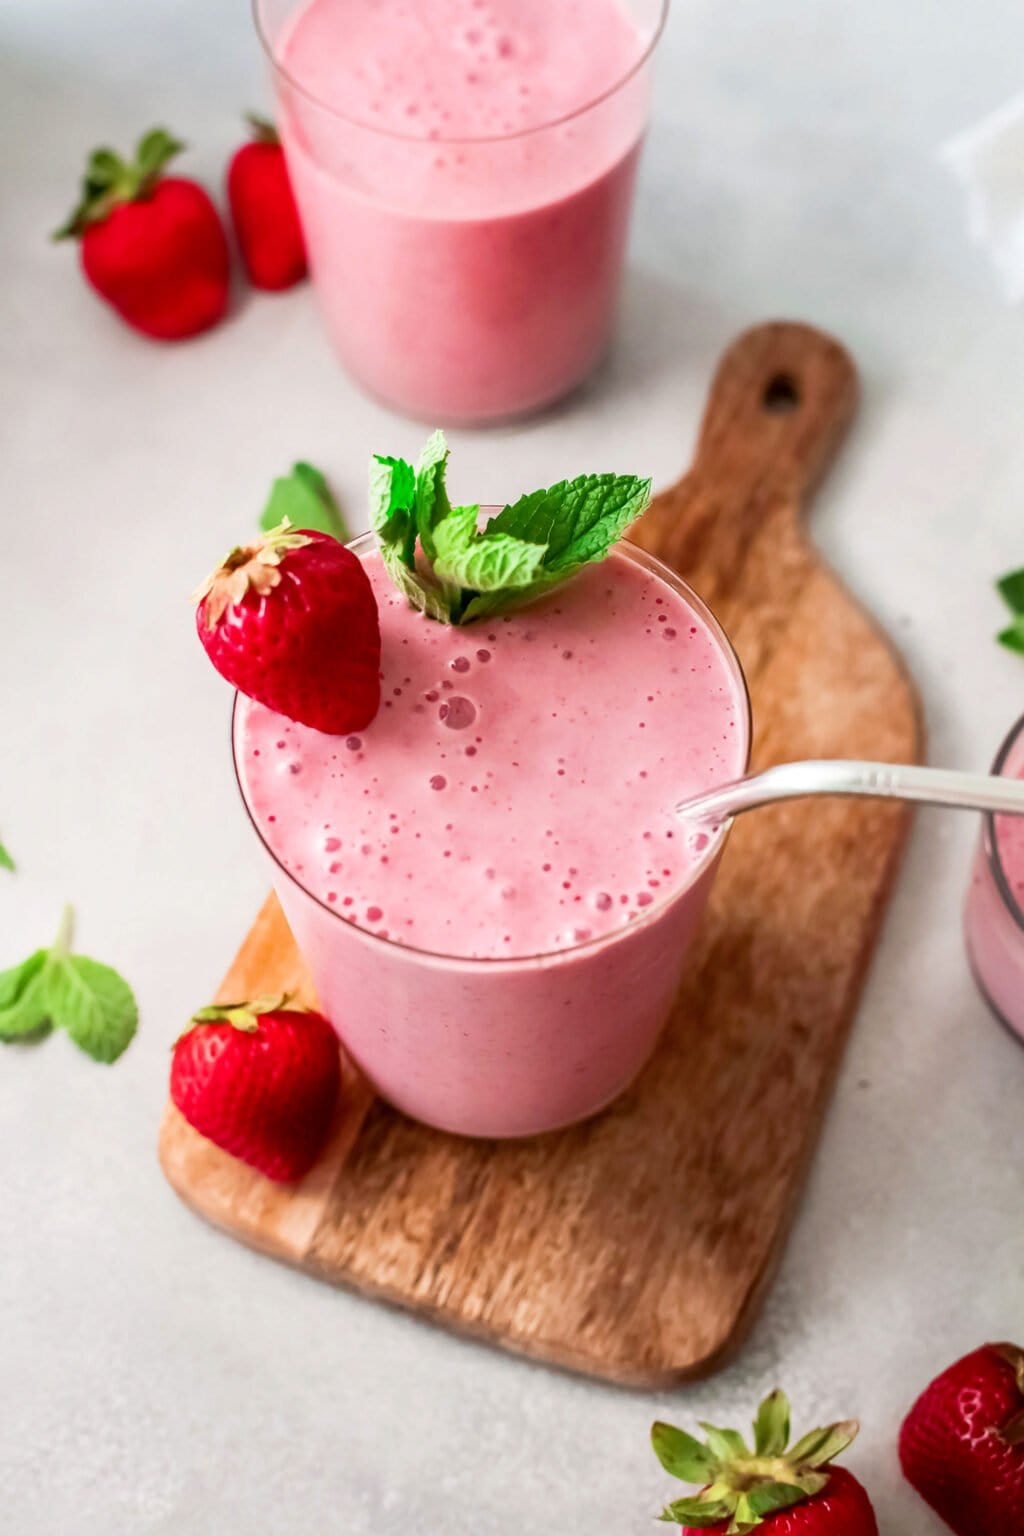 Strawberry Banana Smoothie (Frozen Fruit Smoothie) - Fit Foodie Finds